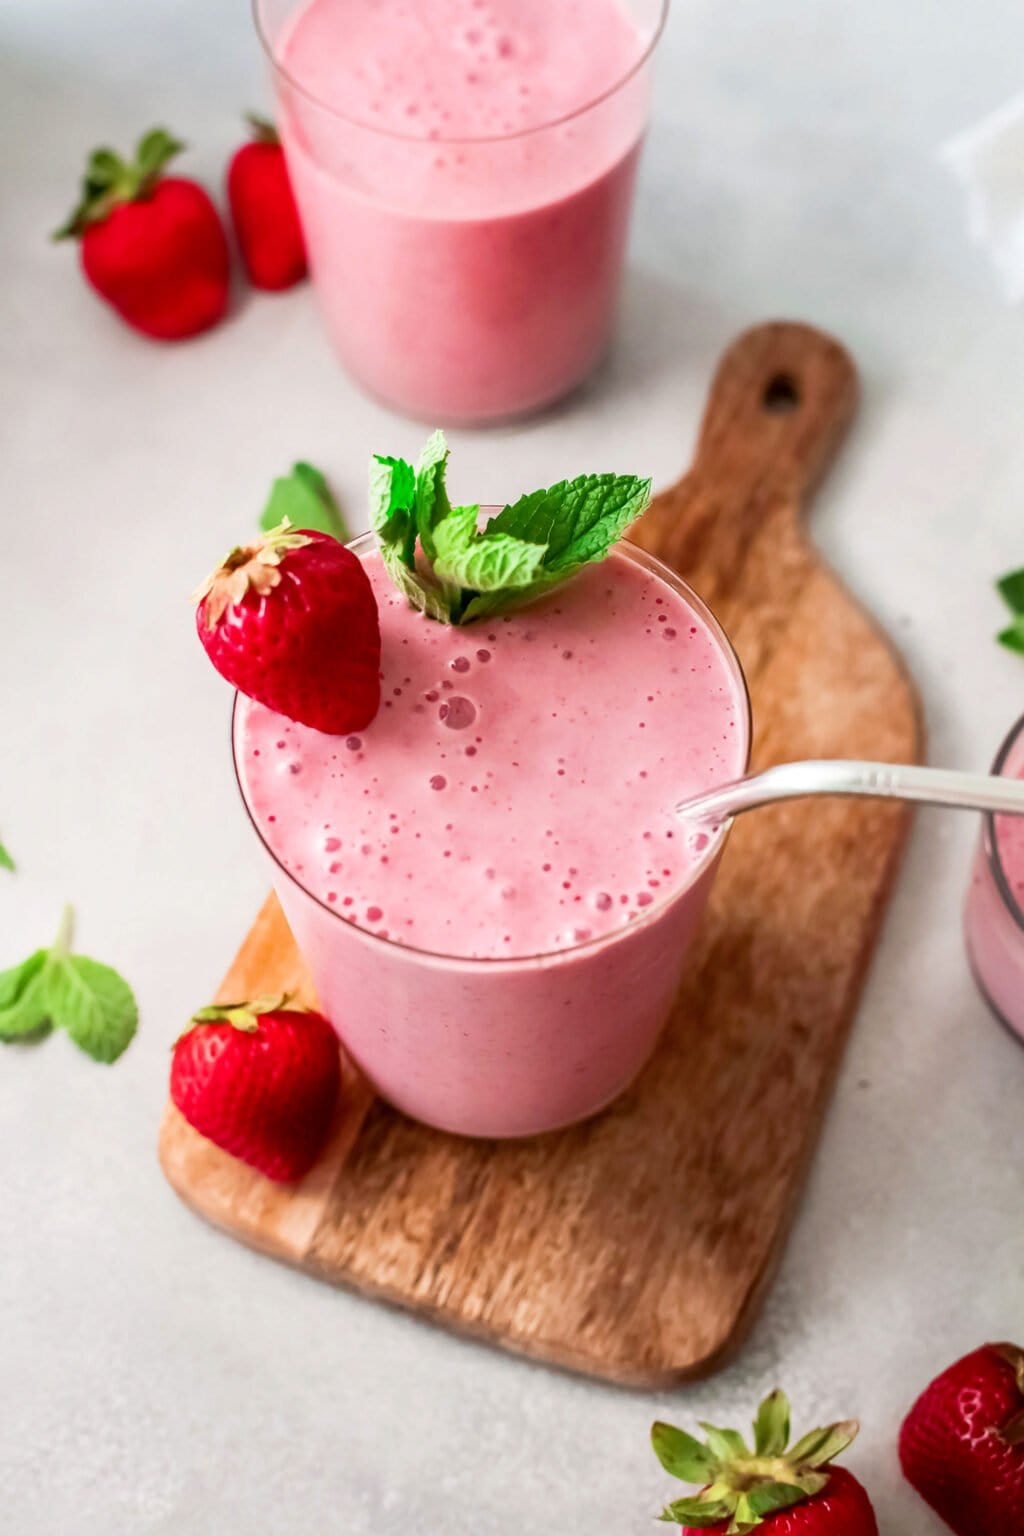 Strawberry Banana Smoothie (Frozen Fruit Smoothie) - Fit Foodie Finds